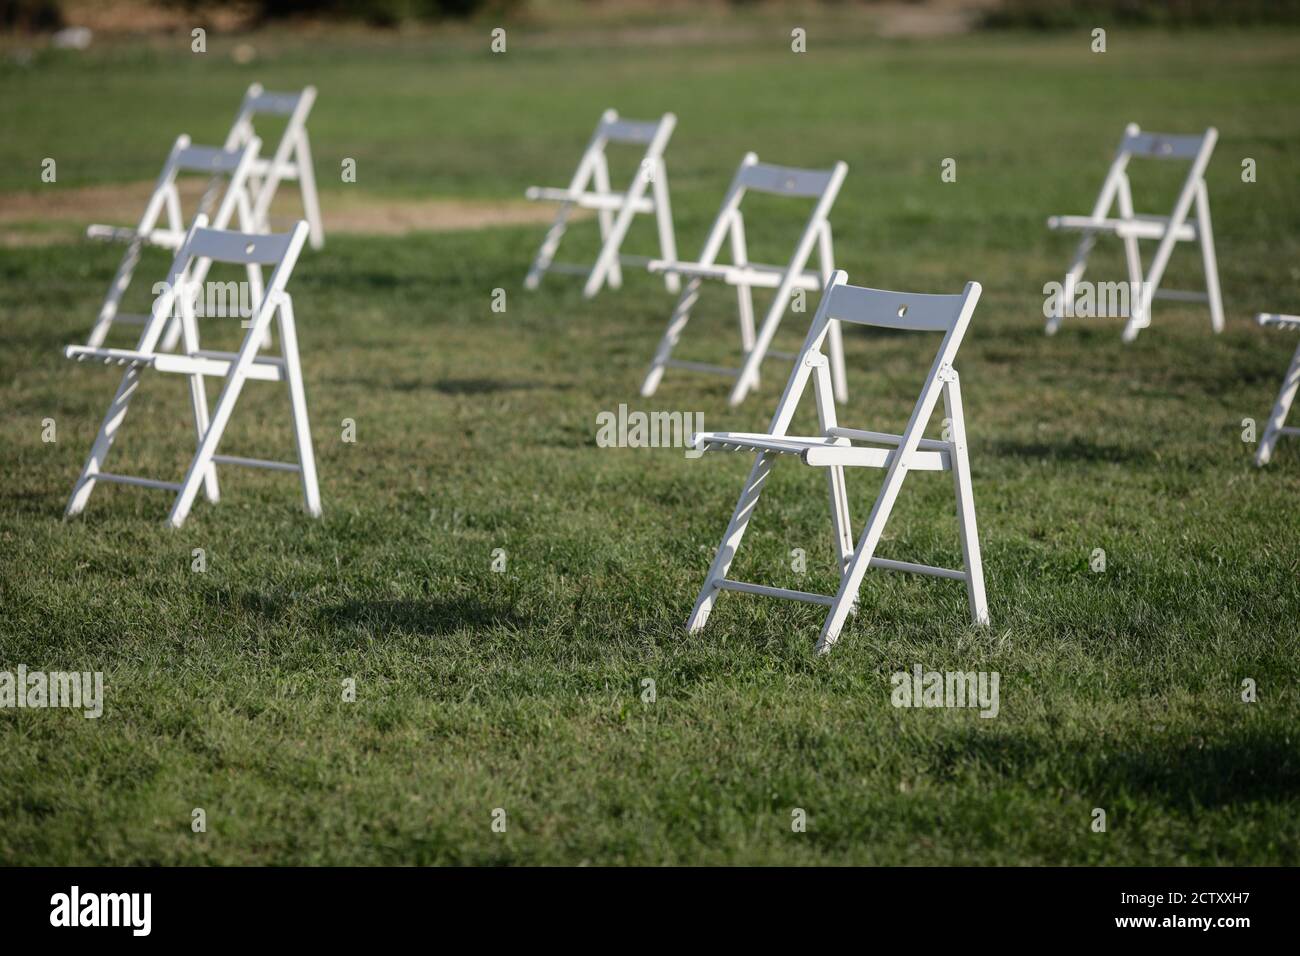 Chairs apart one from another to maintain the social distance during the Covid-19 outbreak at an outdoor event on the grass Stock Photo